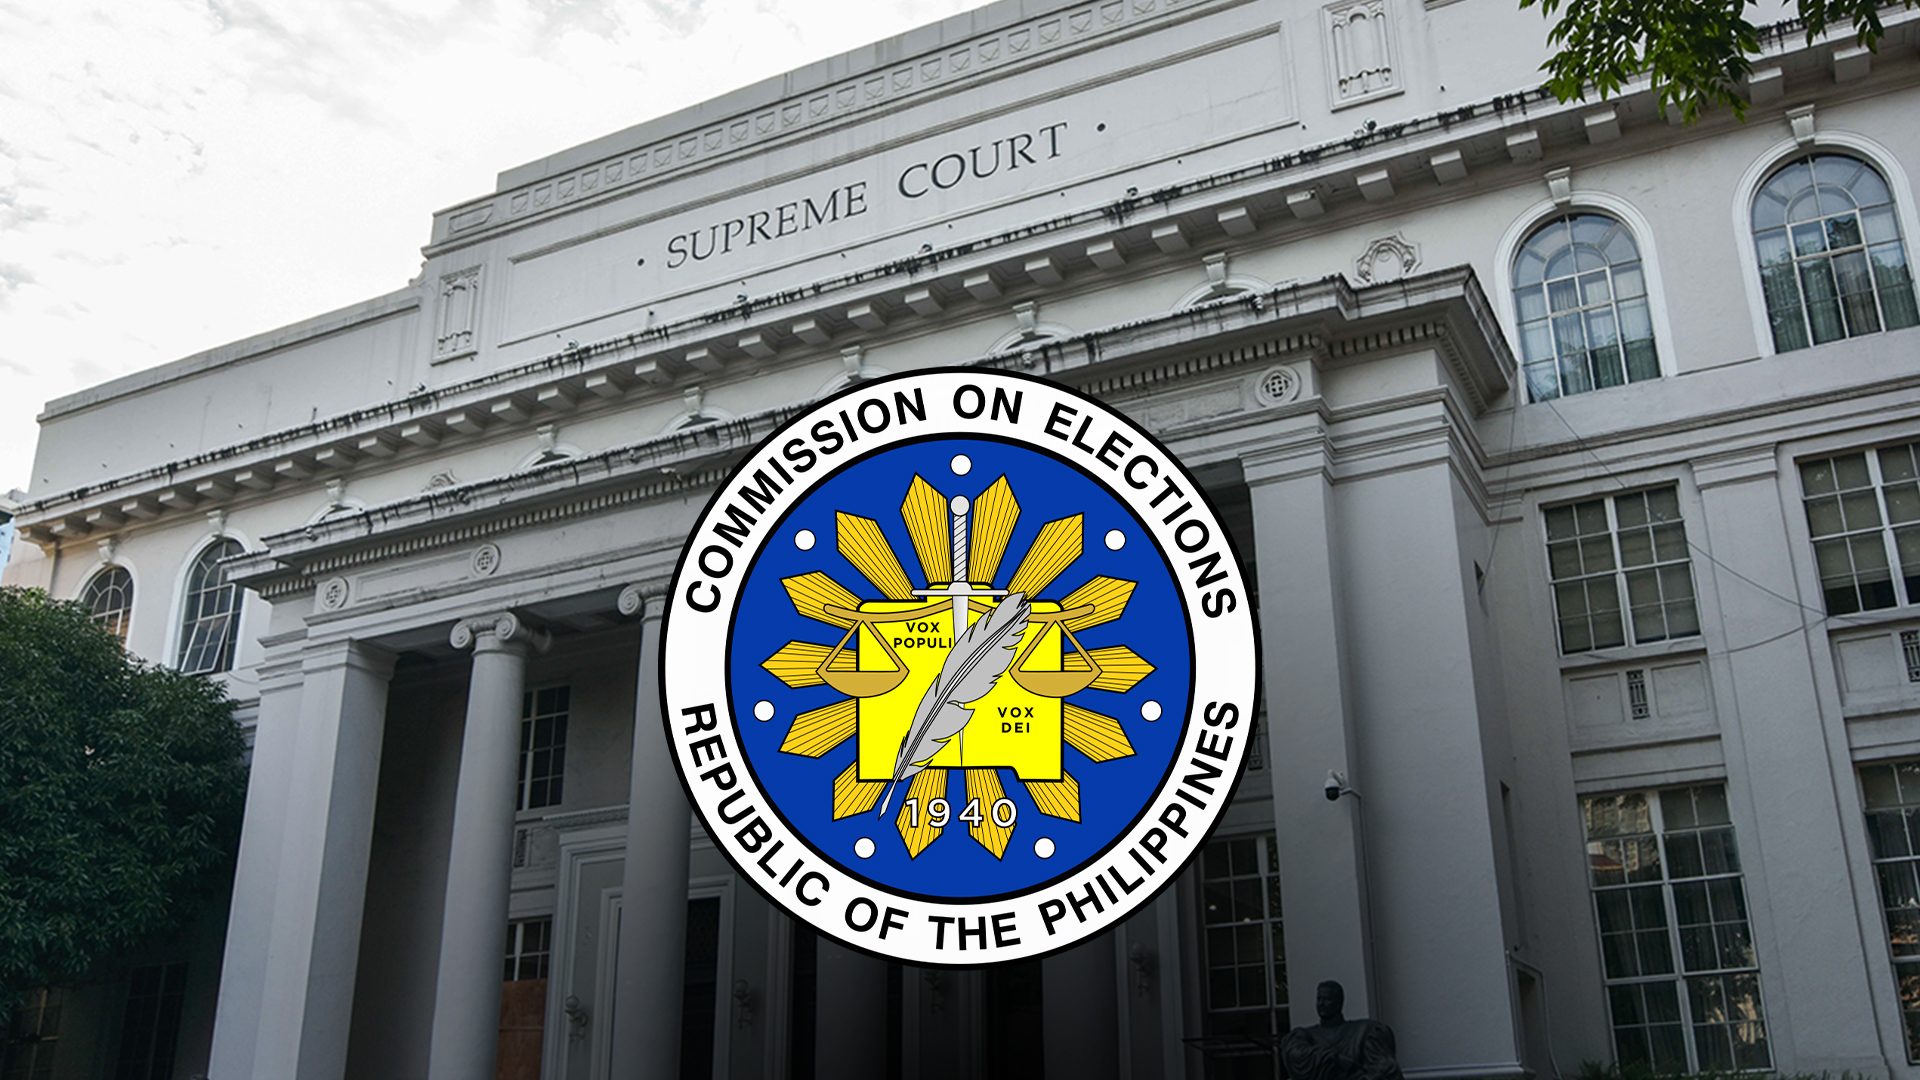 6 party-list groups rejected by Comelec secure Supreme Court TRO